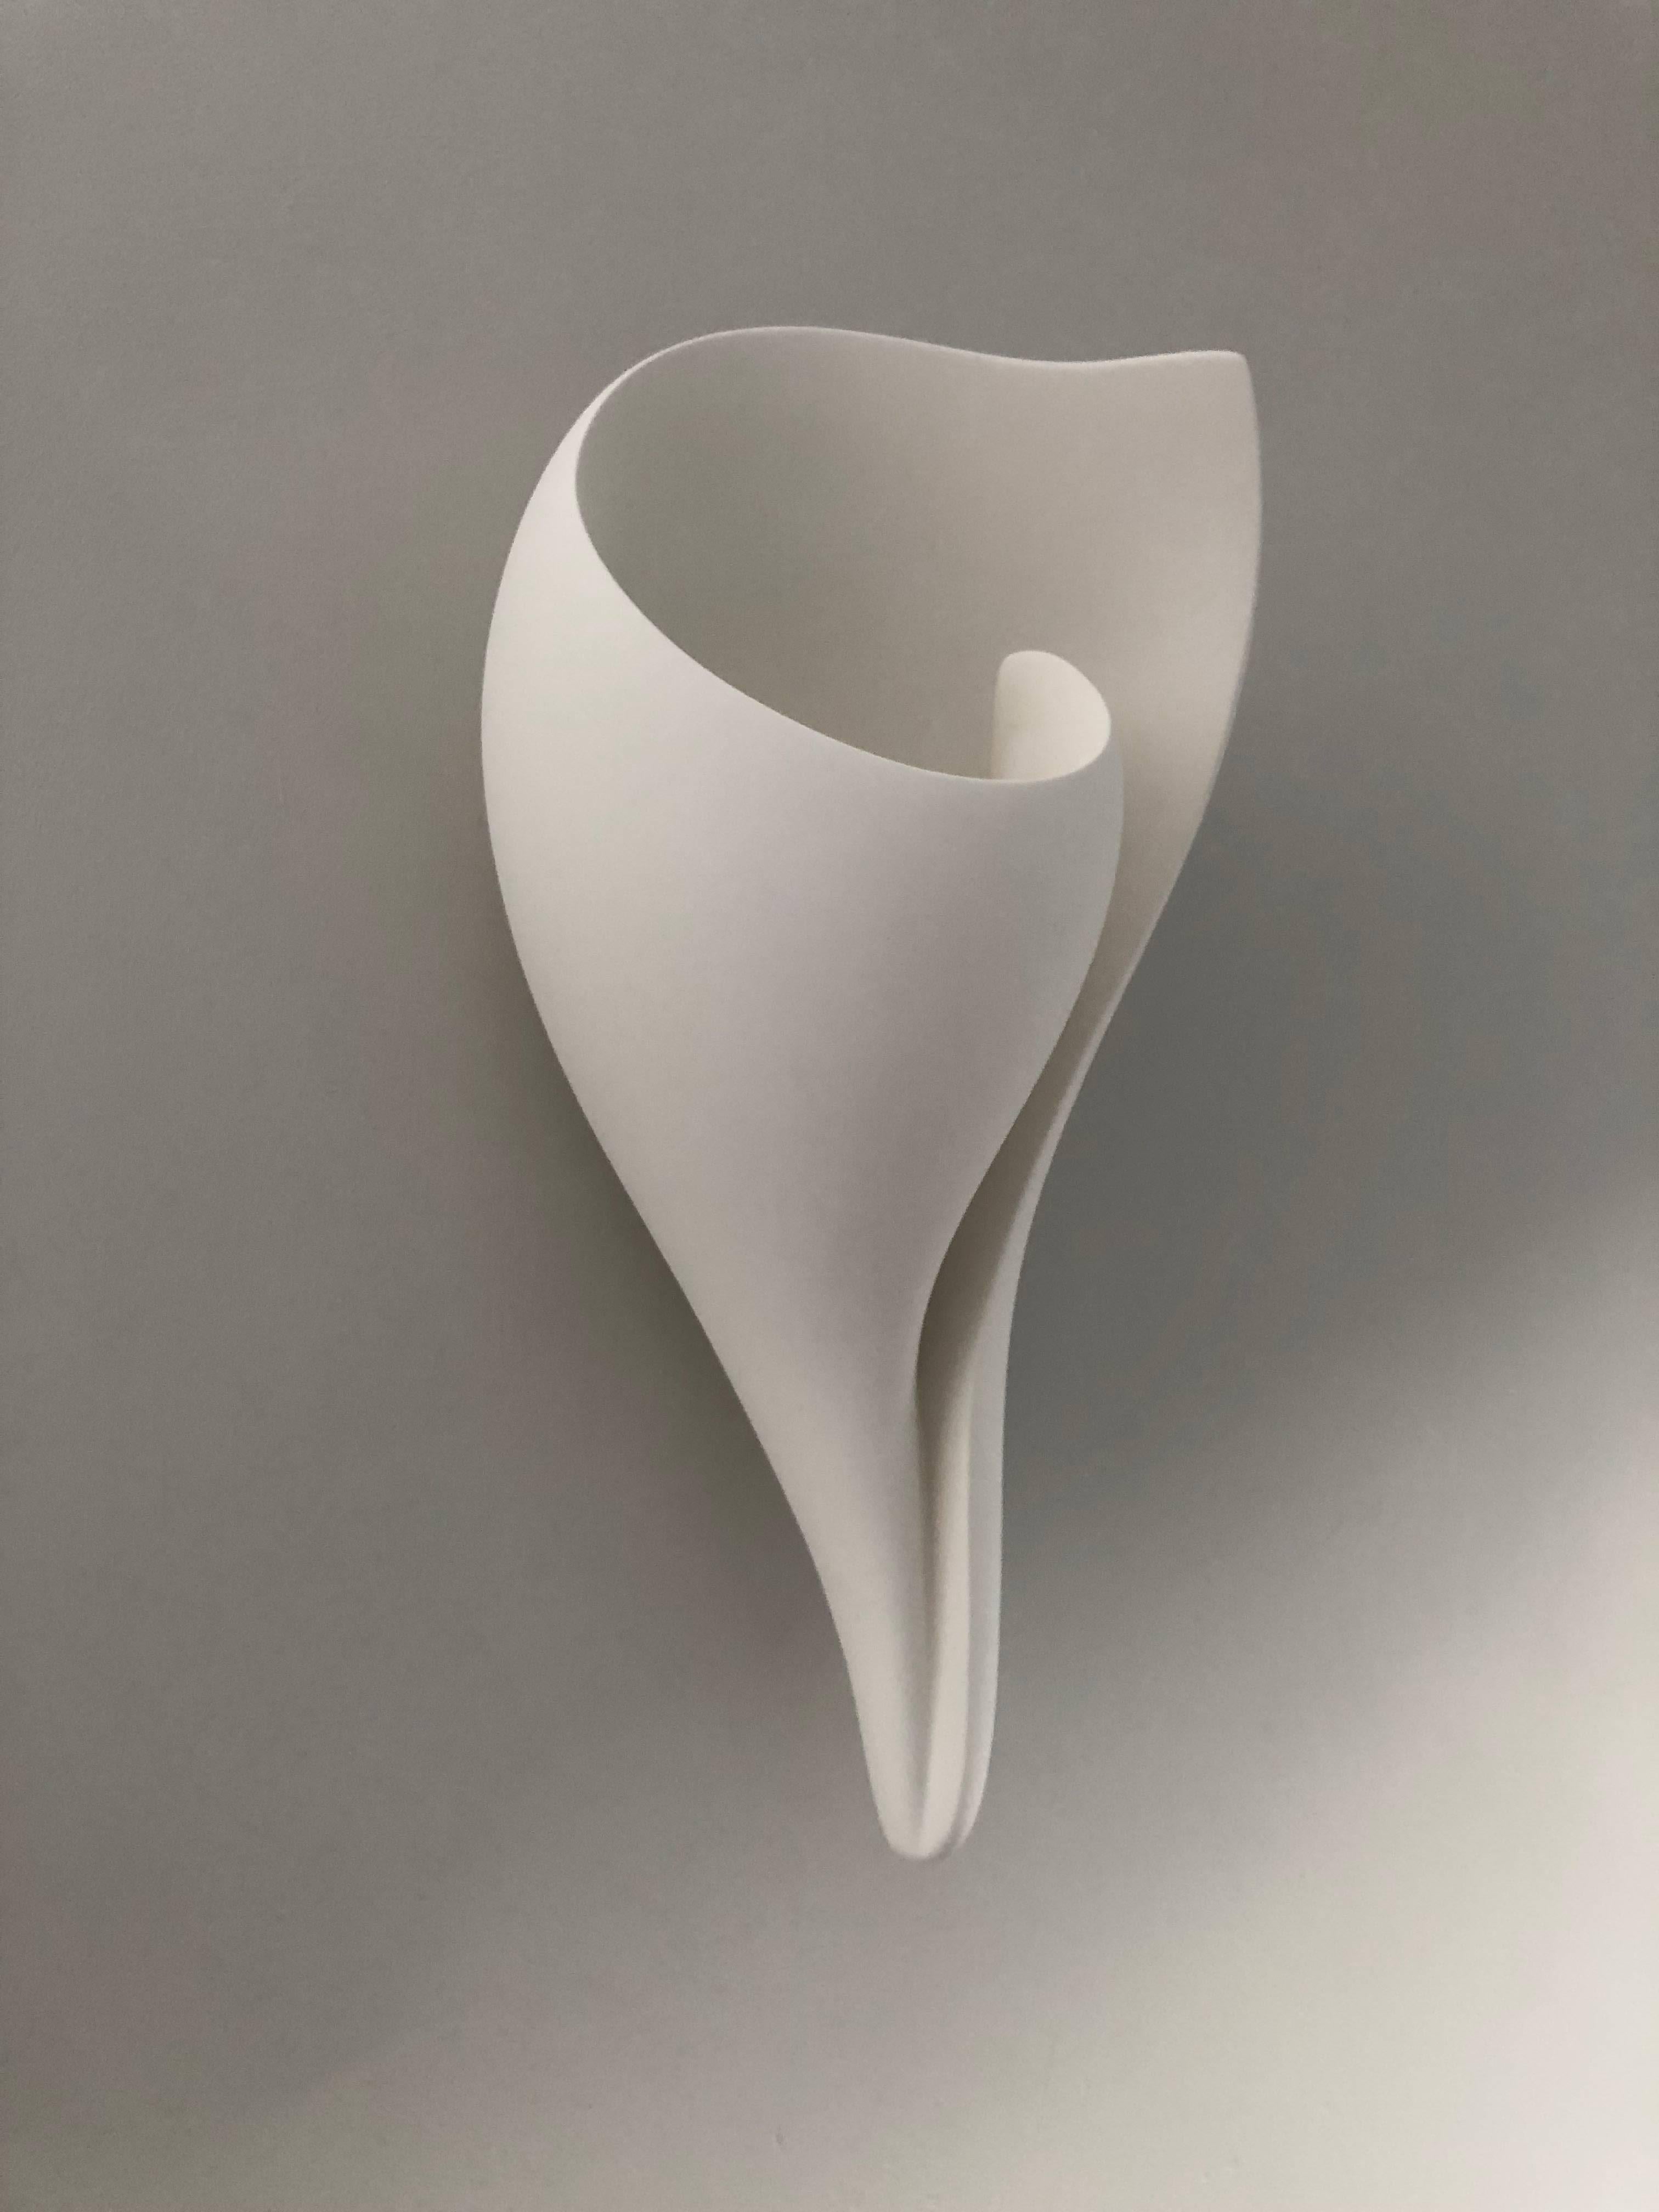 Organic Modern Handmade Monumental Shell Wall-Mounted Sculpture White Plaster, Hannah Woodhouse For Sale